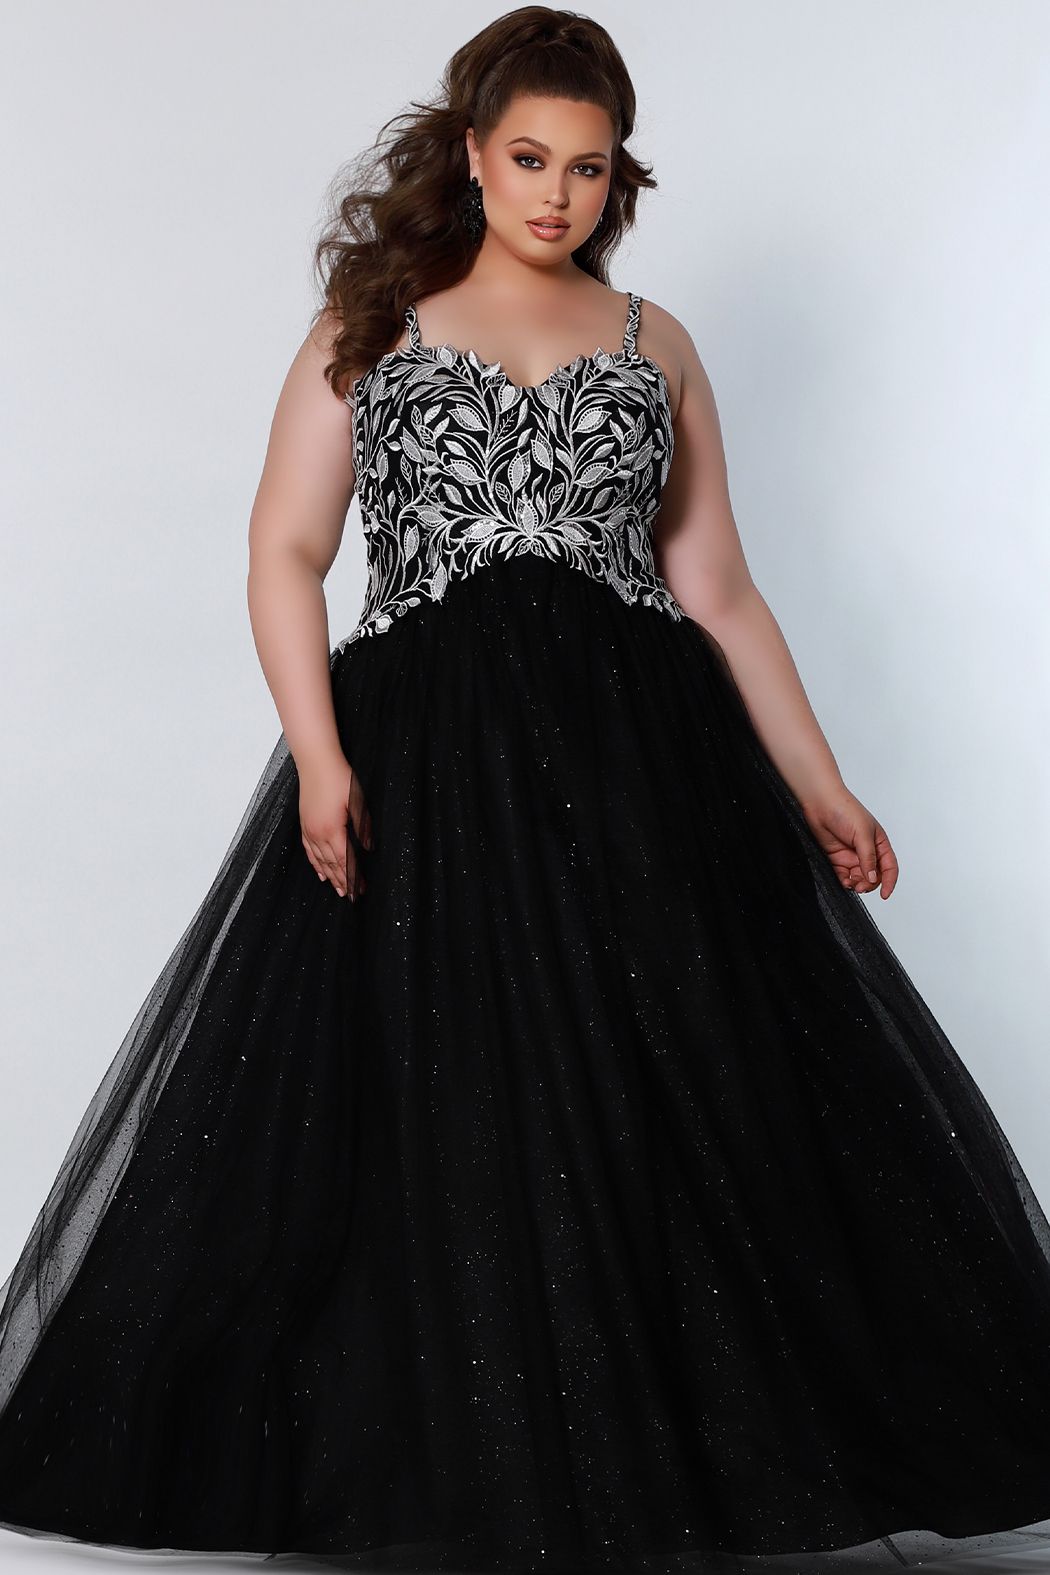 Sydney's Closet SC7329 This prom dress is full of romantic design details from the sweetheart neckline, white embroidered lace appliques, and lace-up back with modesty panel. A voluminous ball gown skirt completes the fairytale with layered tulle and glitter tulle.  Available colors:  Black, Platinum, Royal, Red  Available sizes:  14-40